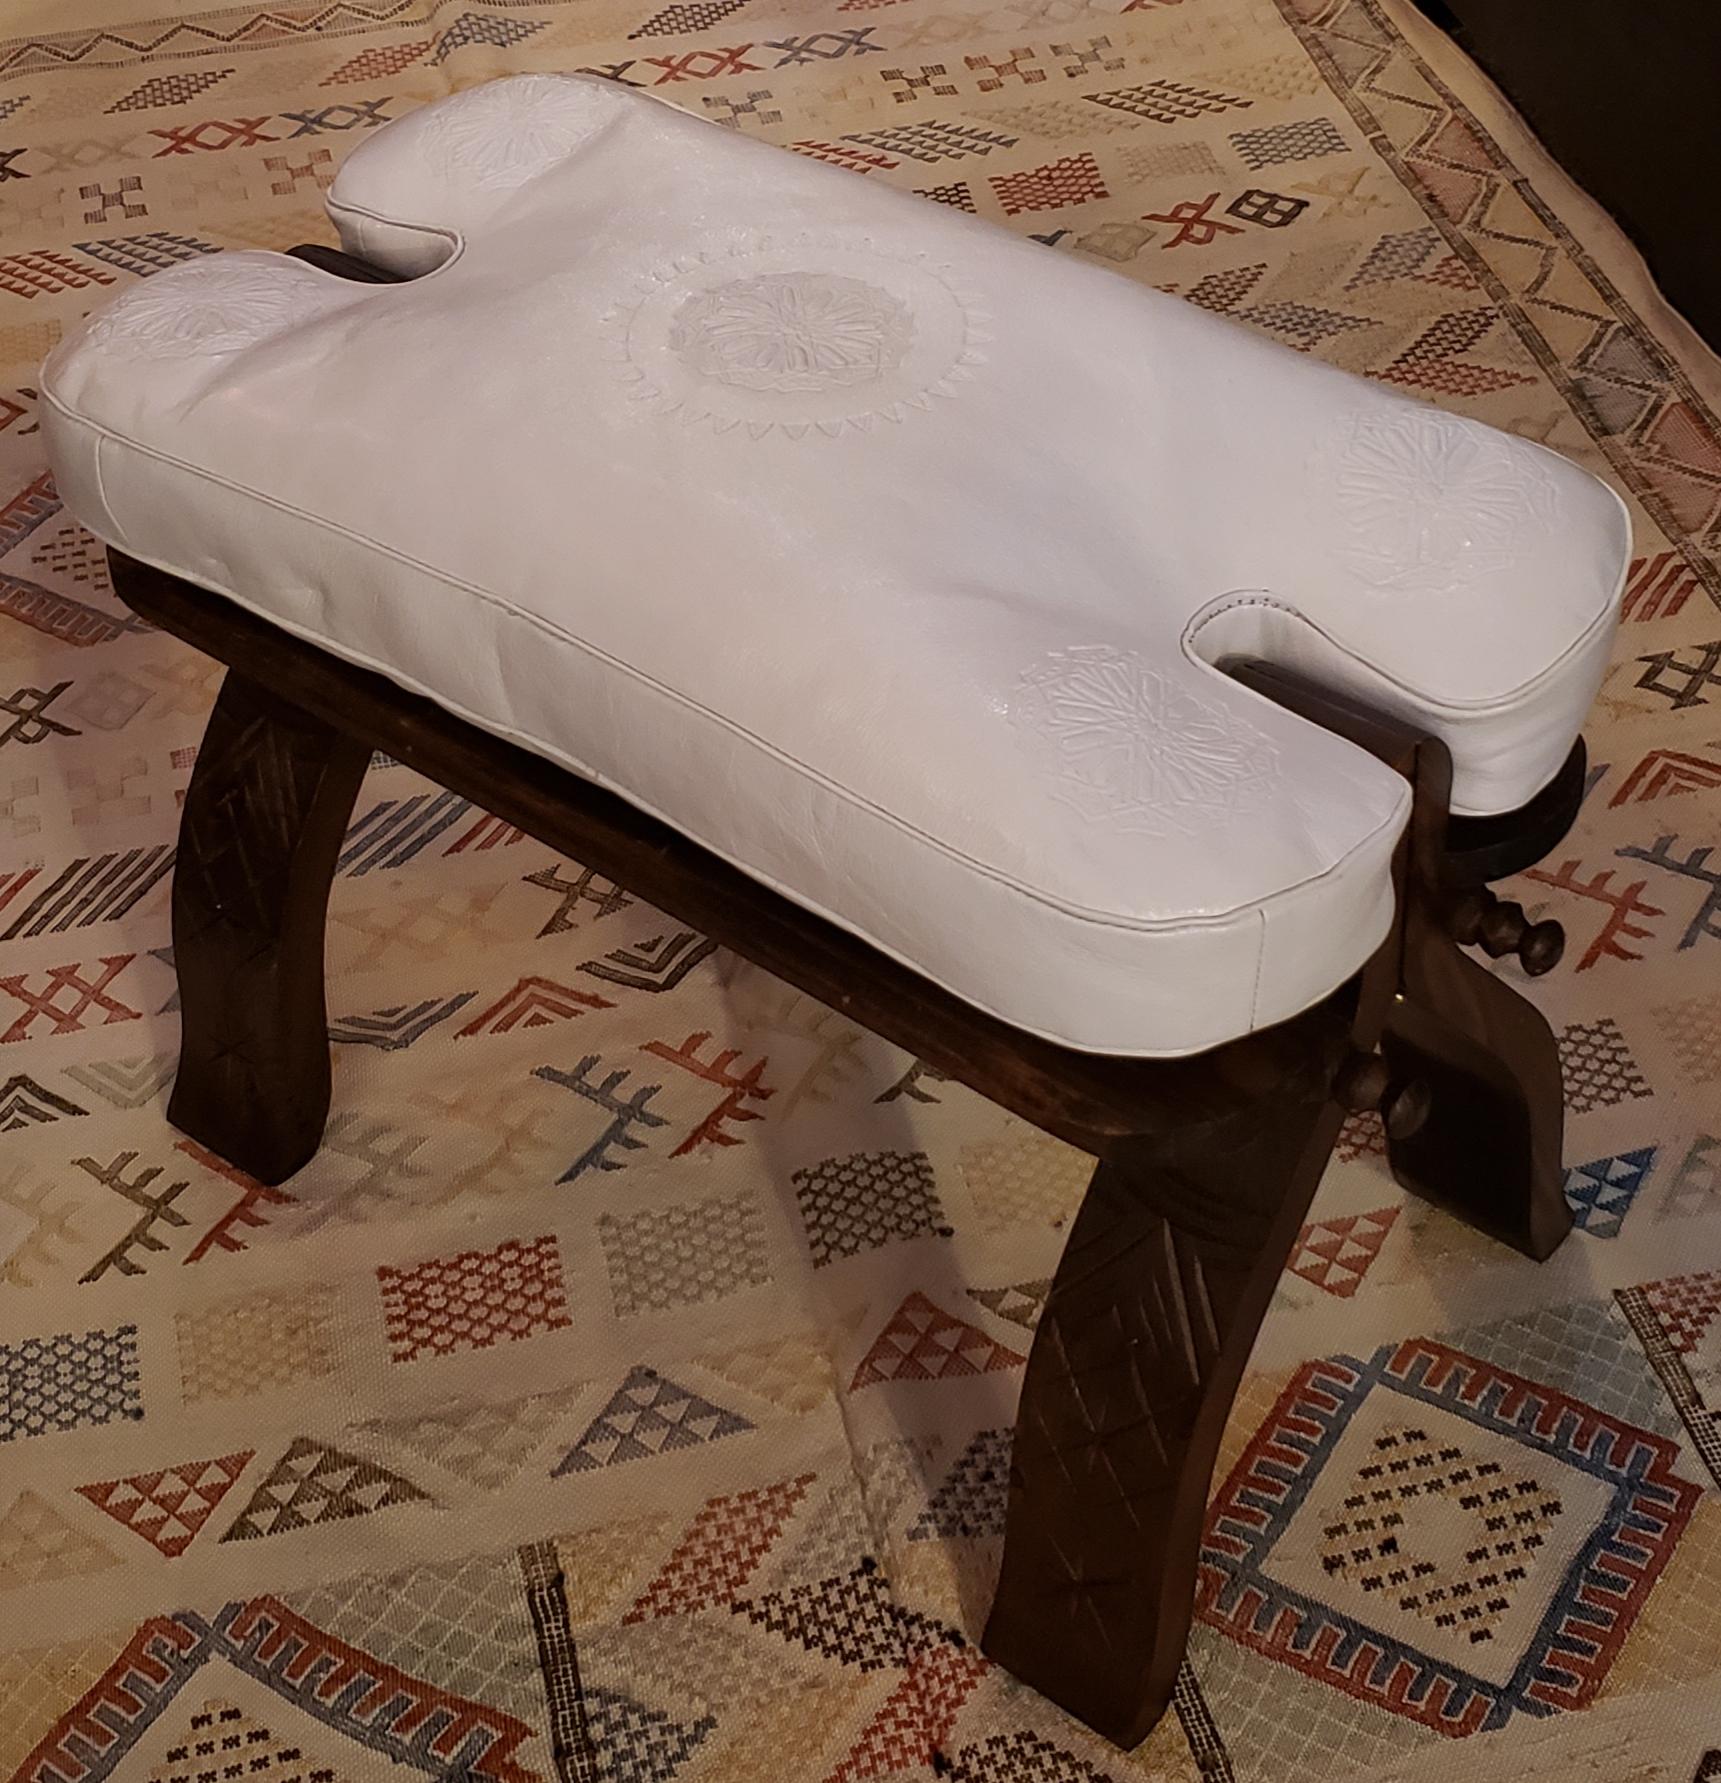 This is a great alternative to poufs and ottomans.
Handmade Moroccan camel saddle with genuine leather cushion and carved cedar wood base, measuring approximately 25 inches long, 13